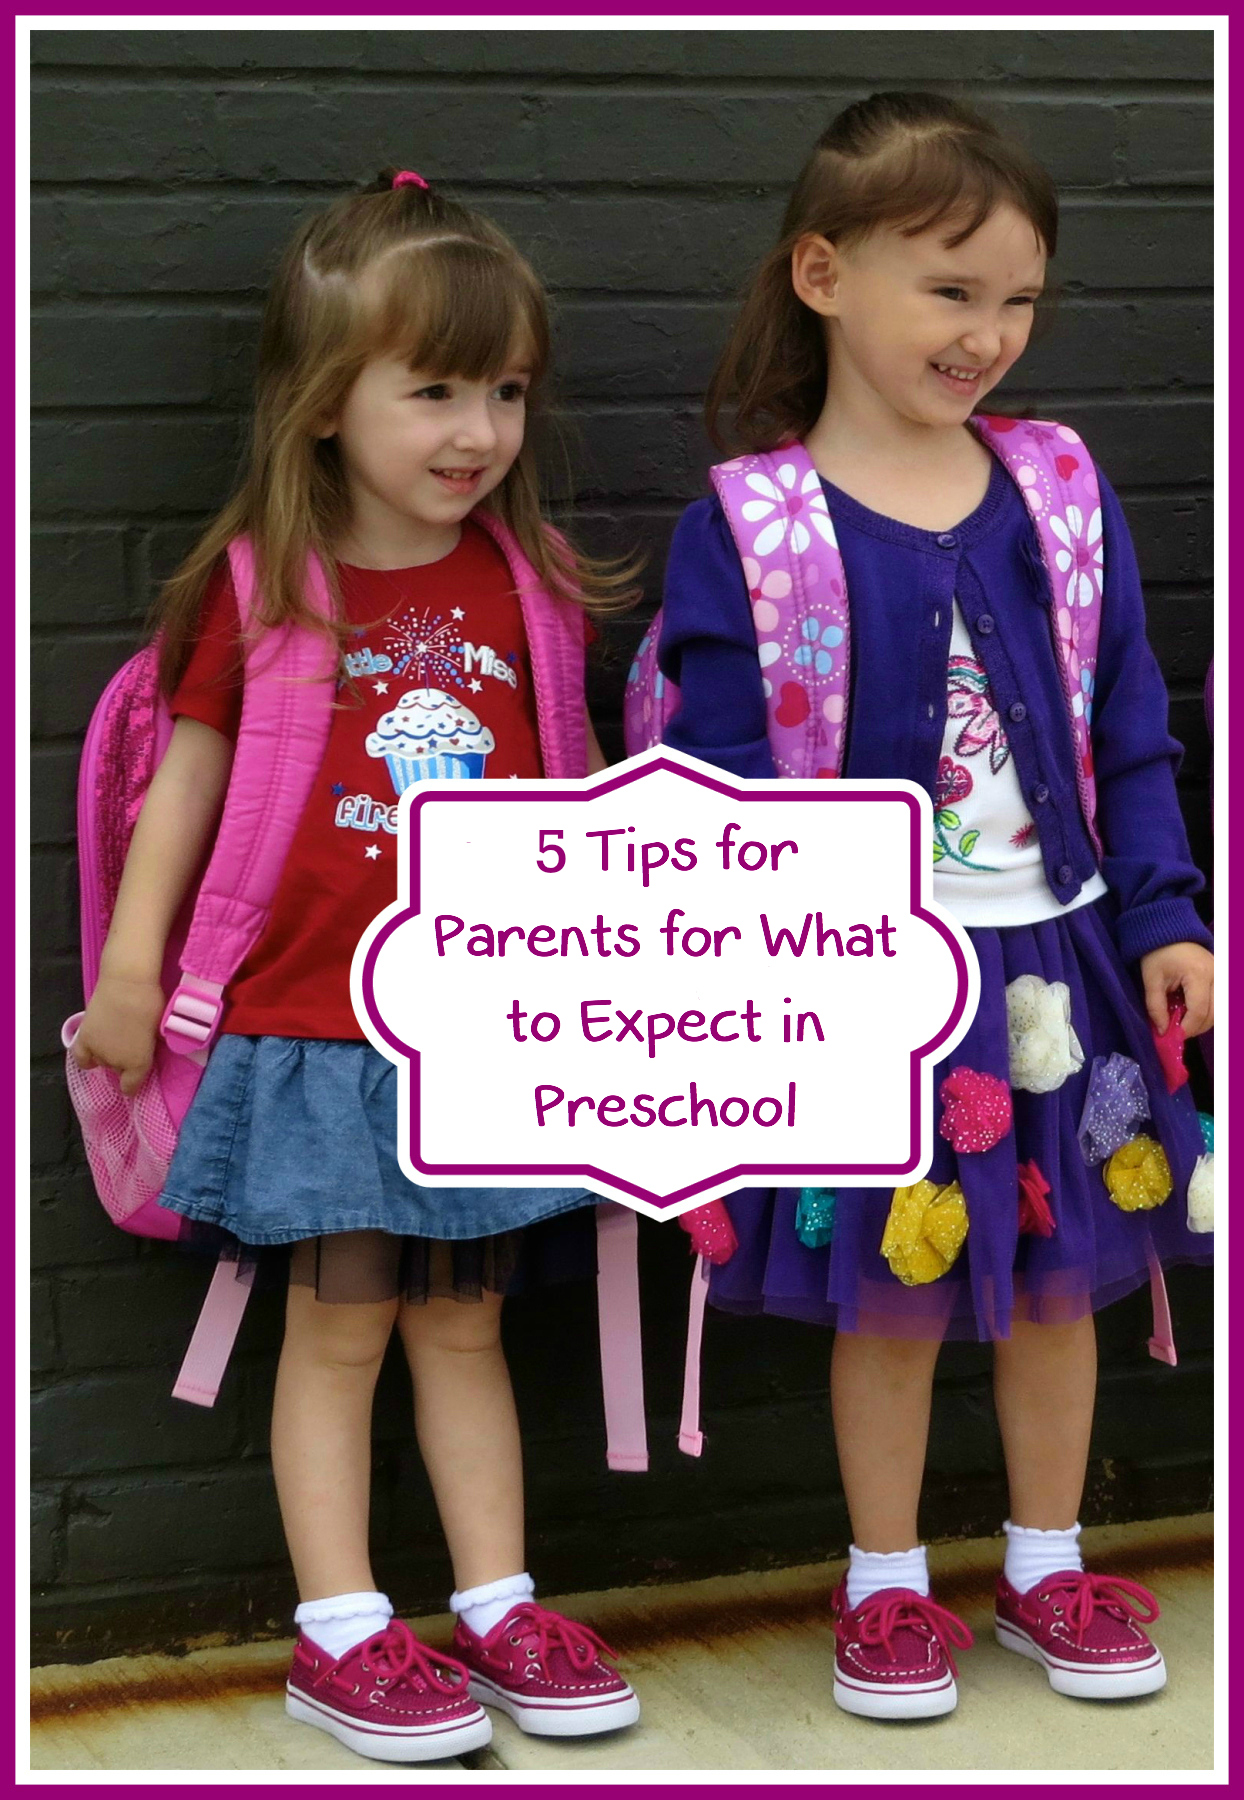 5 Tips for Parents for What to Expect in Preschool